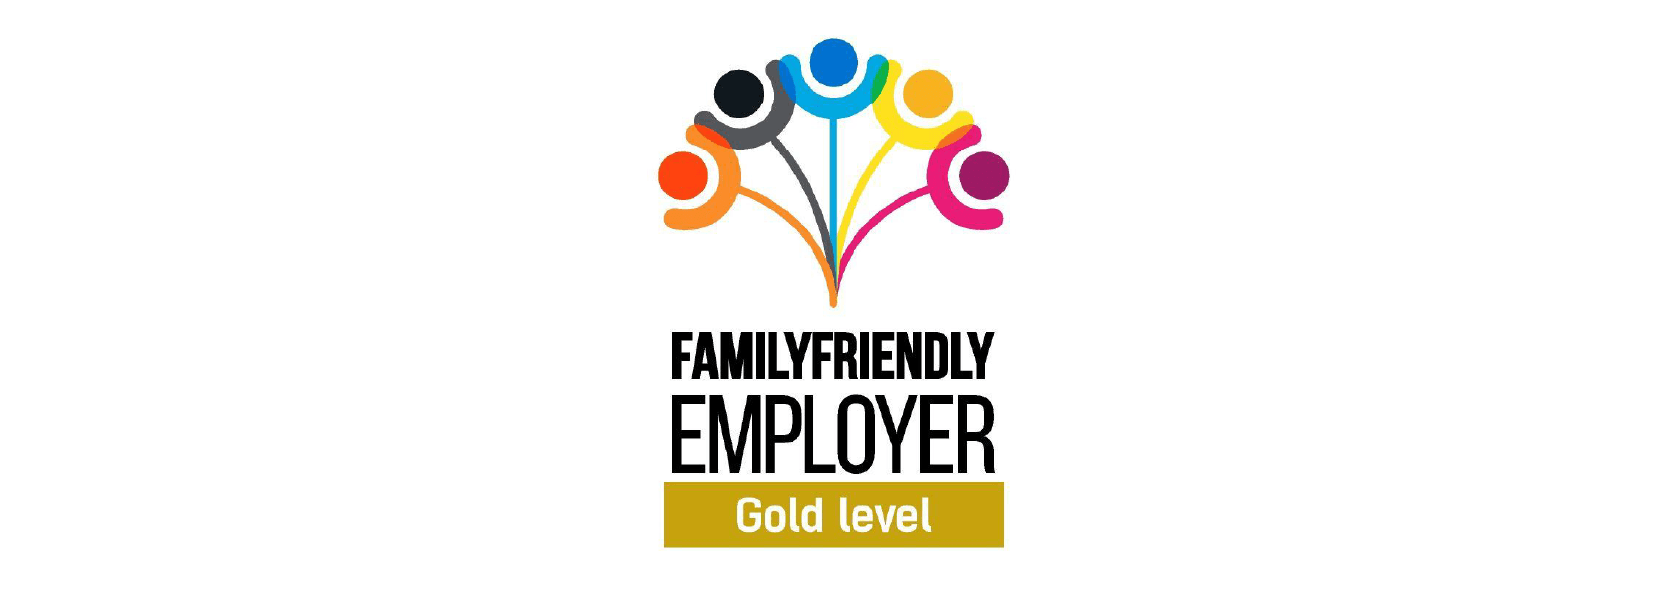 Logo for Family Friendly Employer Gold level certificate, featuring text and five multicolored flower shapes above.